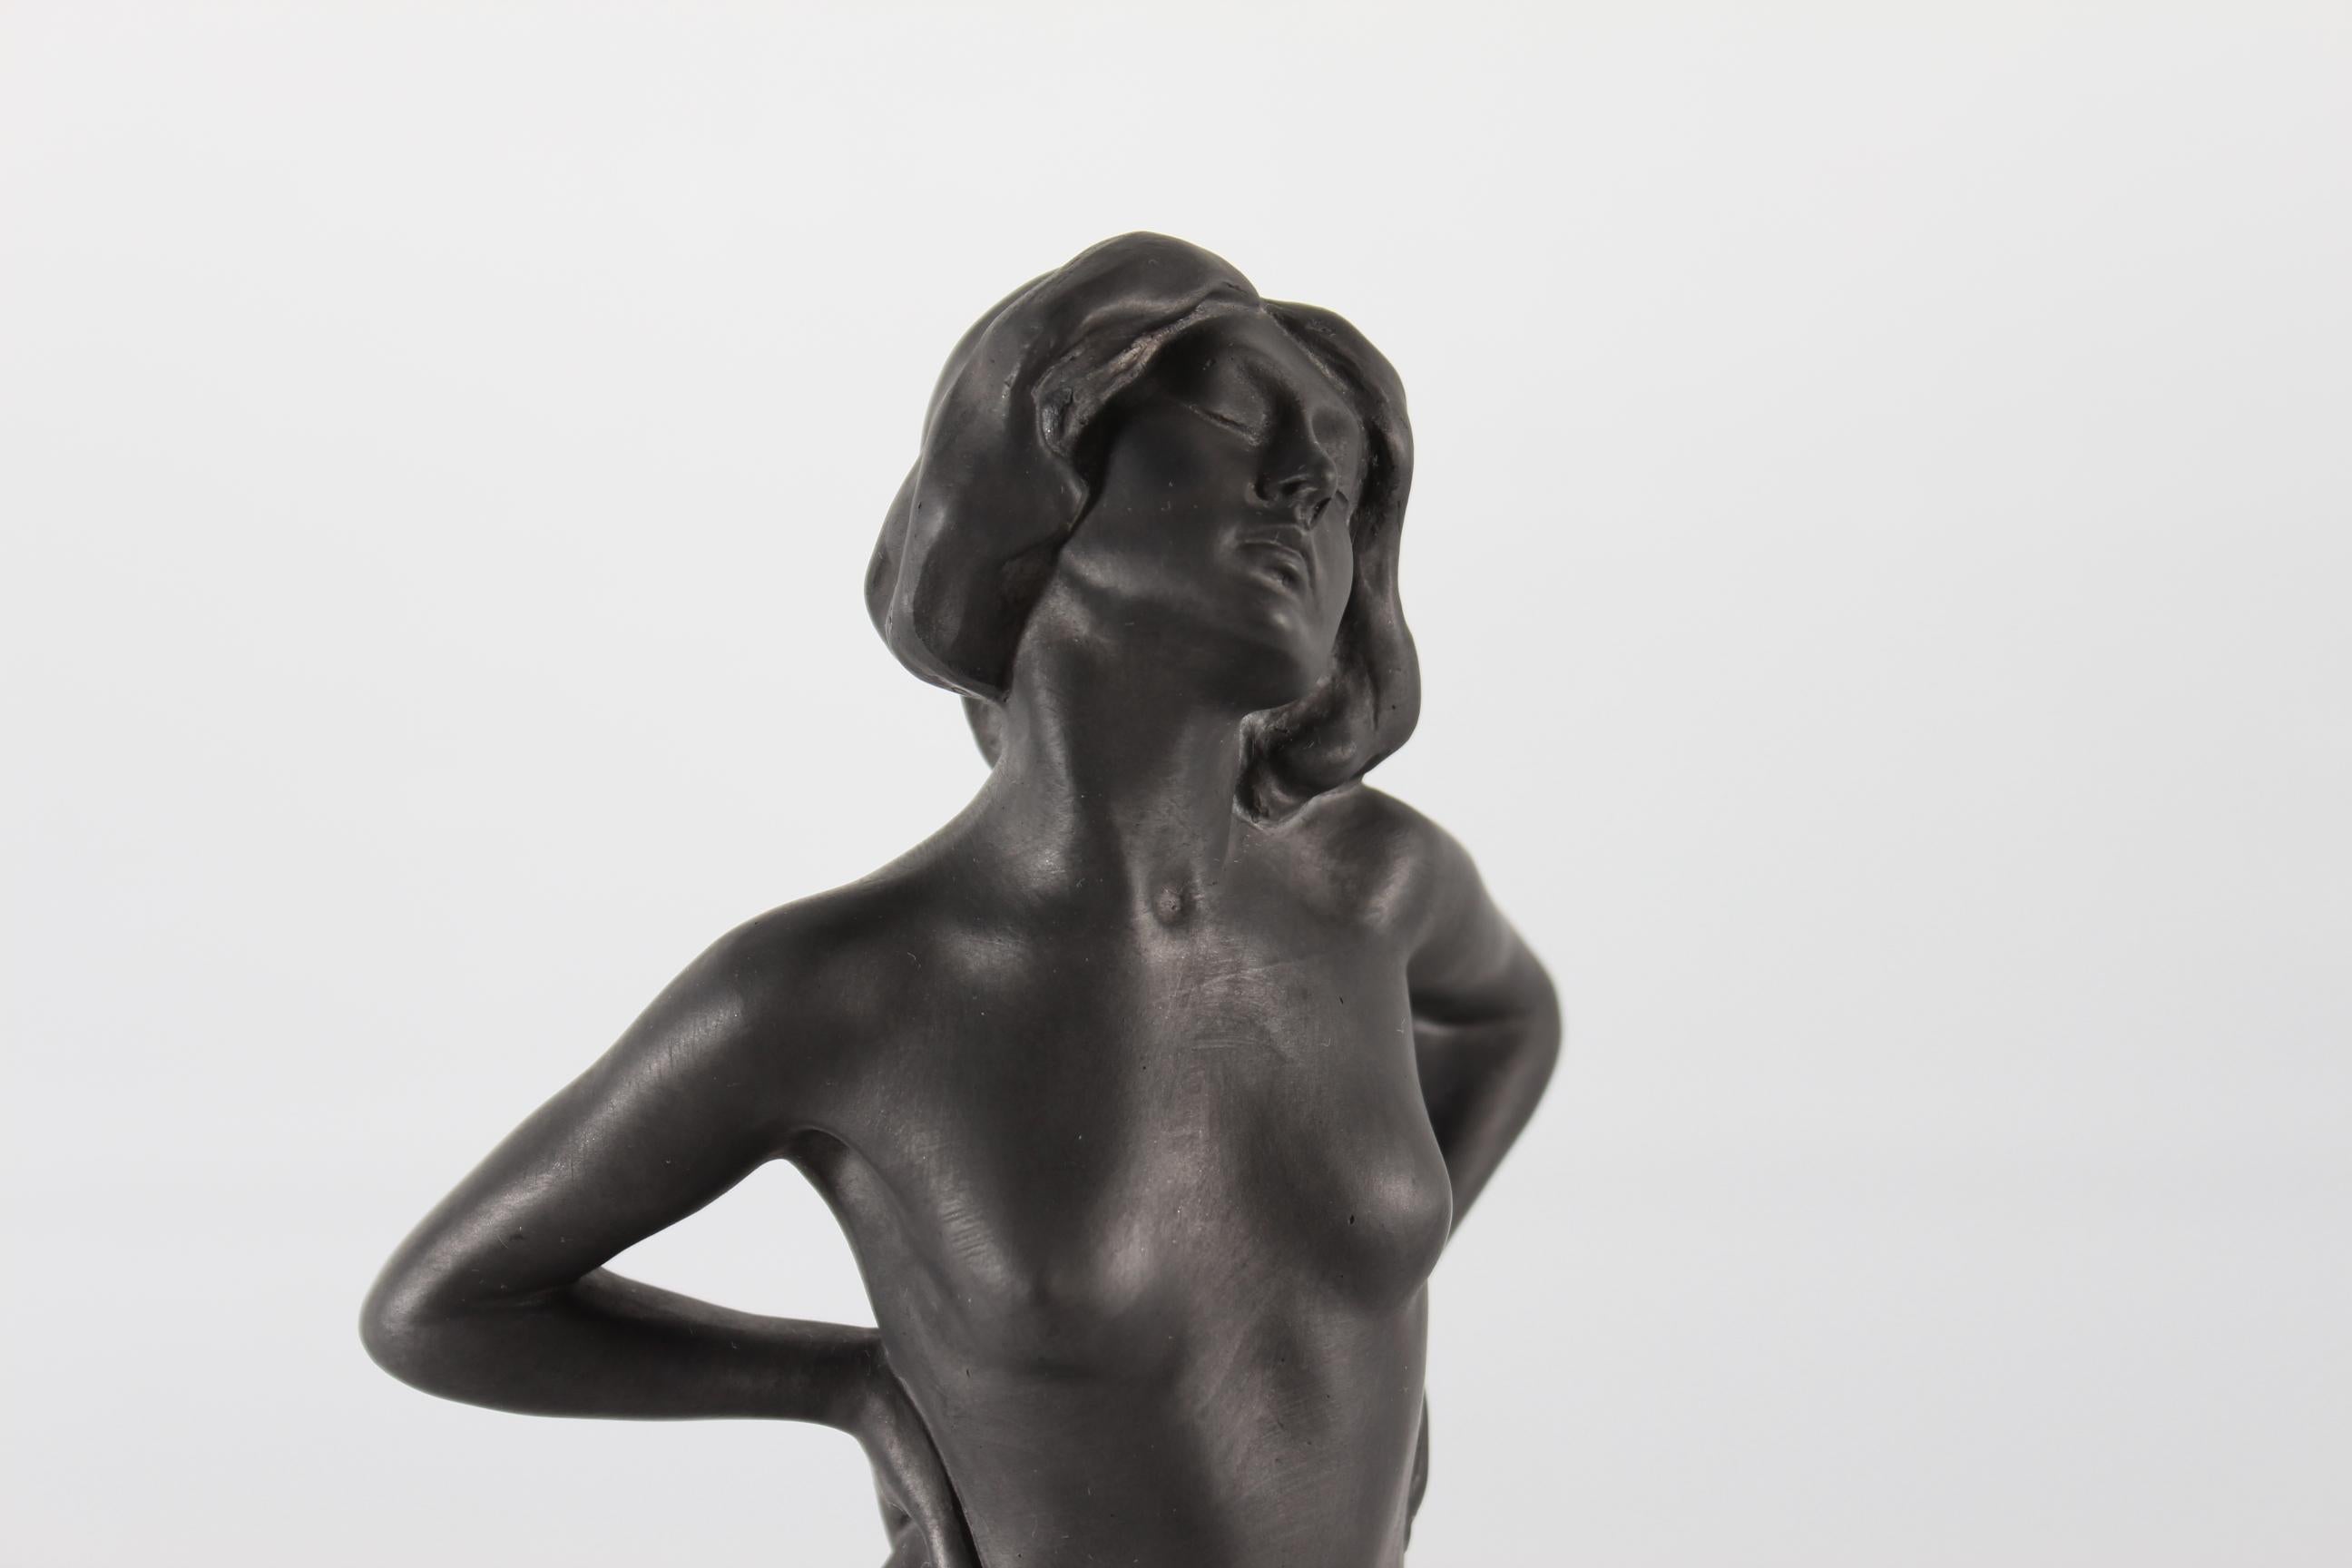 Very rare figurine of a young woman with a man at her feet designed by Danish sculptor Jens Jacob Bregnø (Bregnoe) Nielsen (1877-1946) and manufactured by P. Ipsens Enke circa 1900.

The figurine is made of black terracotta

Sign. J. J. Nielsen